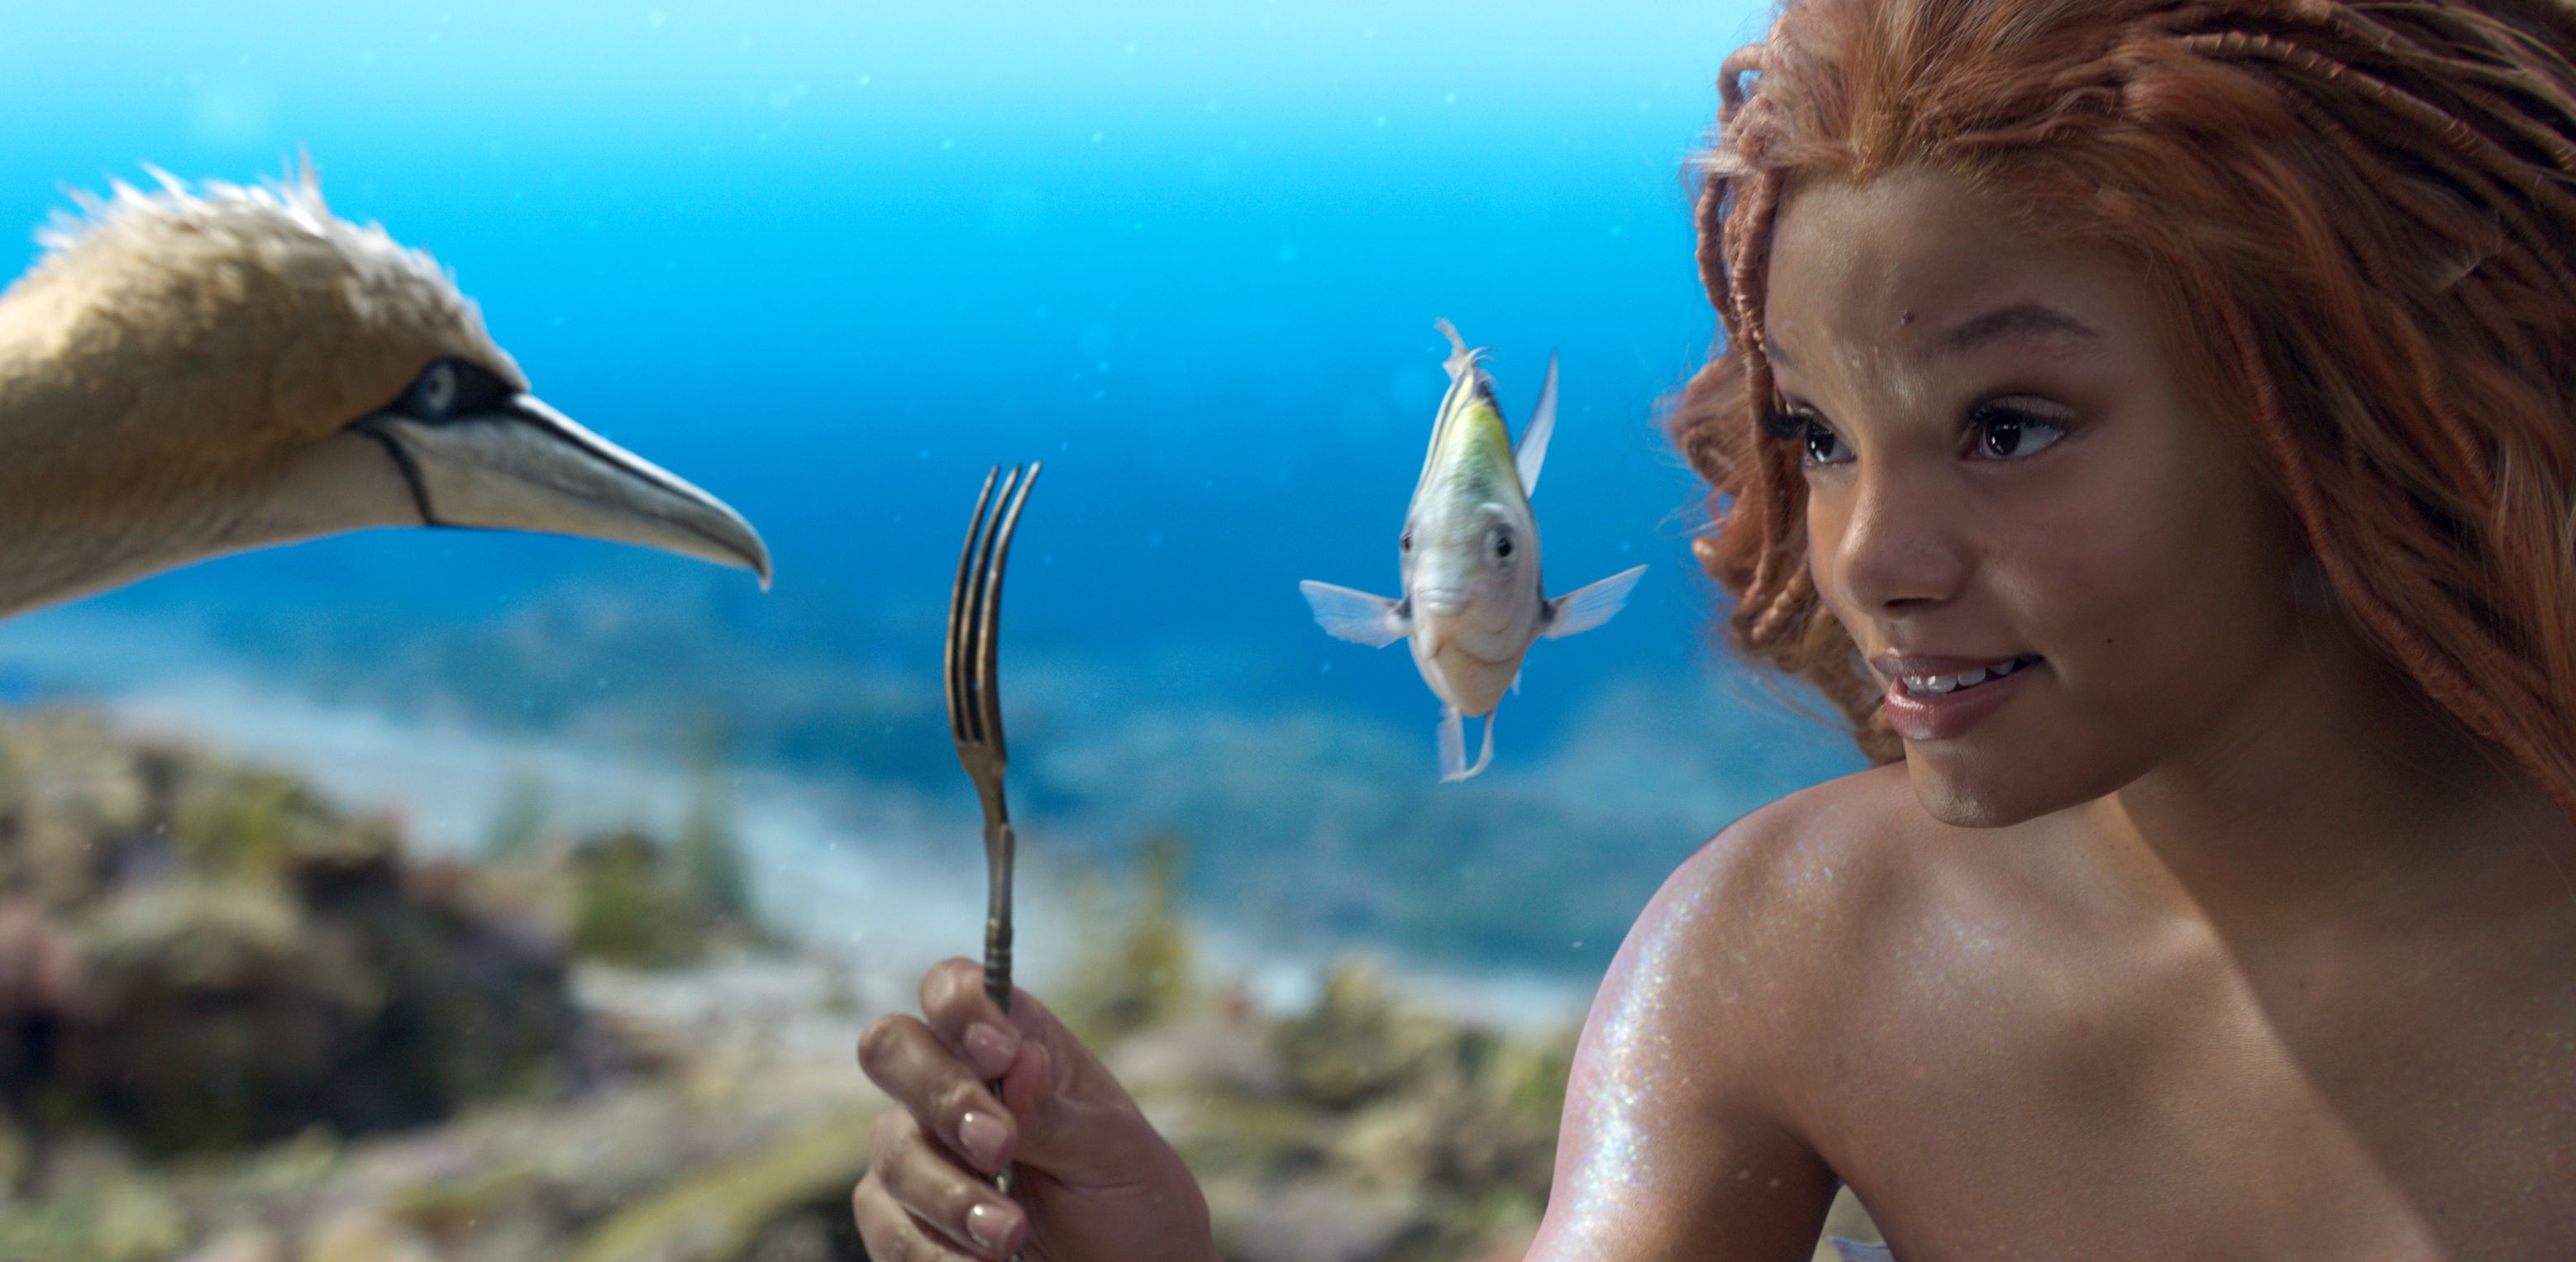 Is The Little Mermaid Streaming? How to Watch The Little Mermaid pic pic